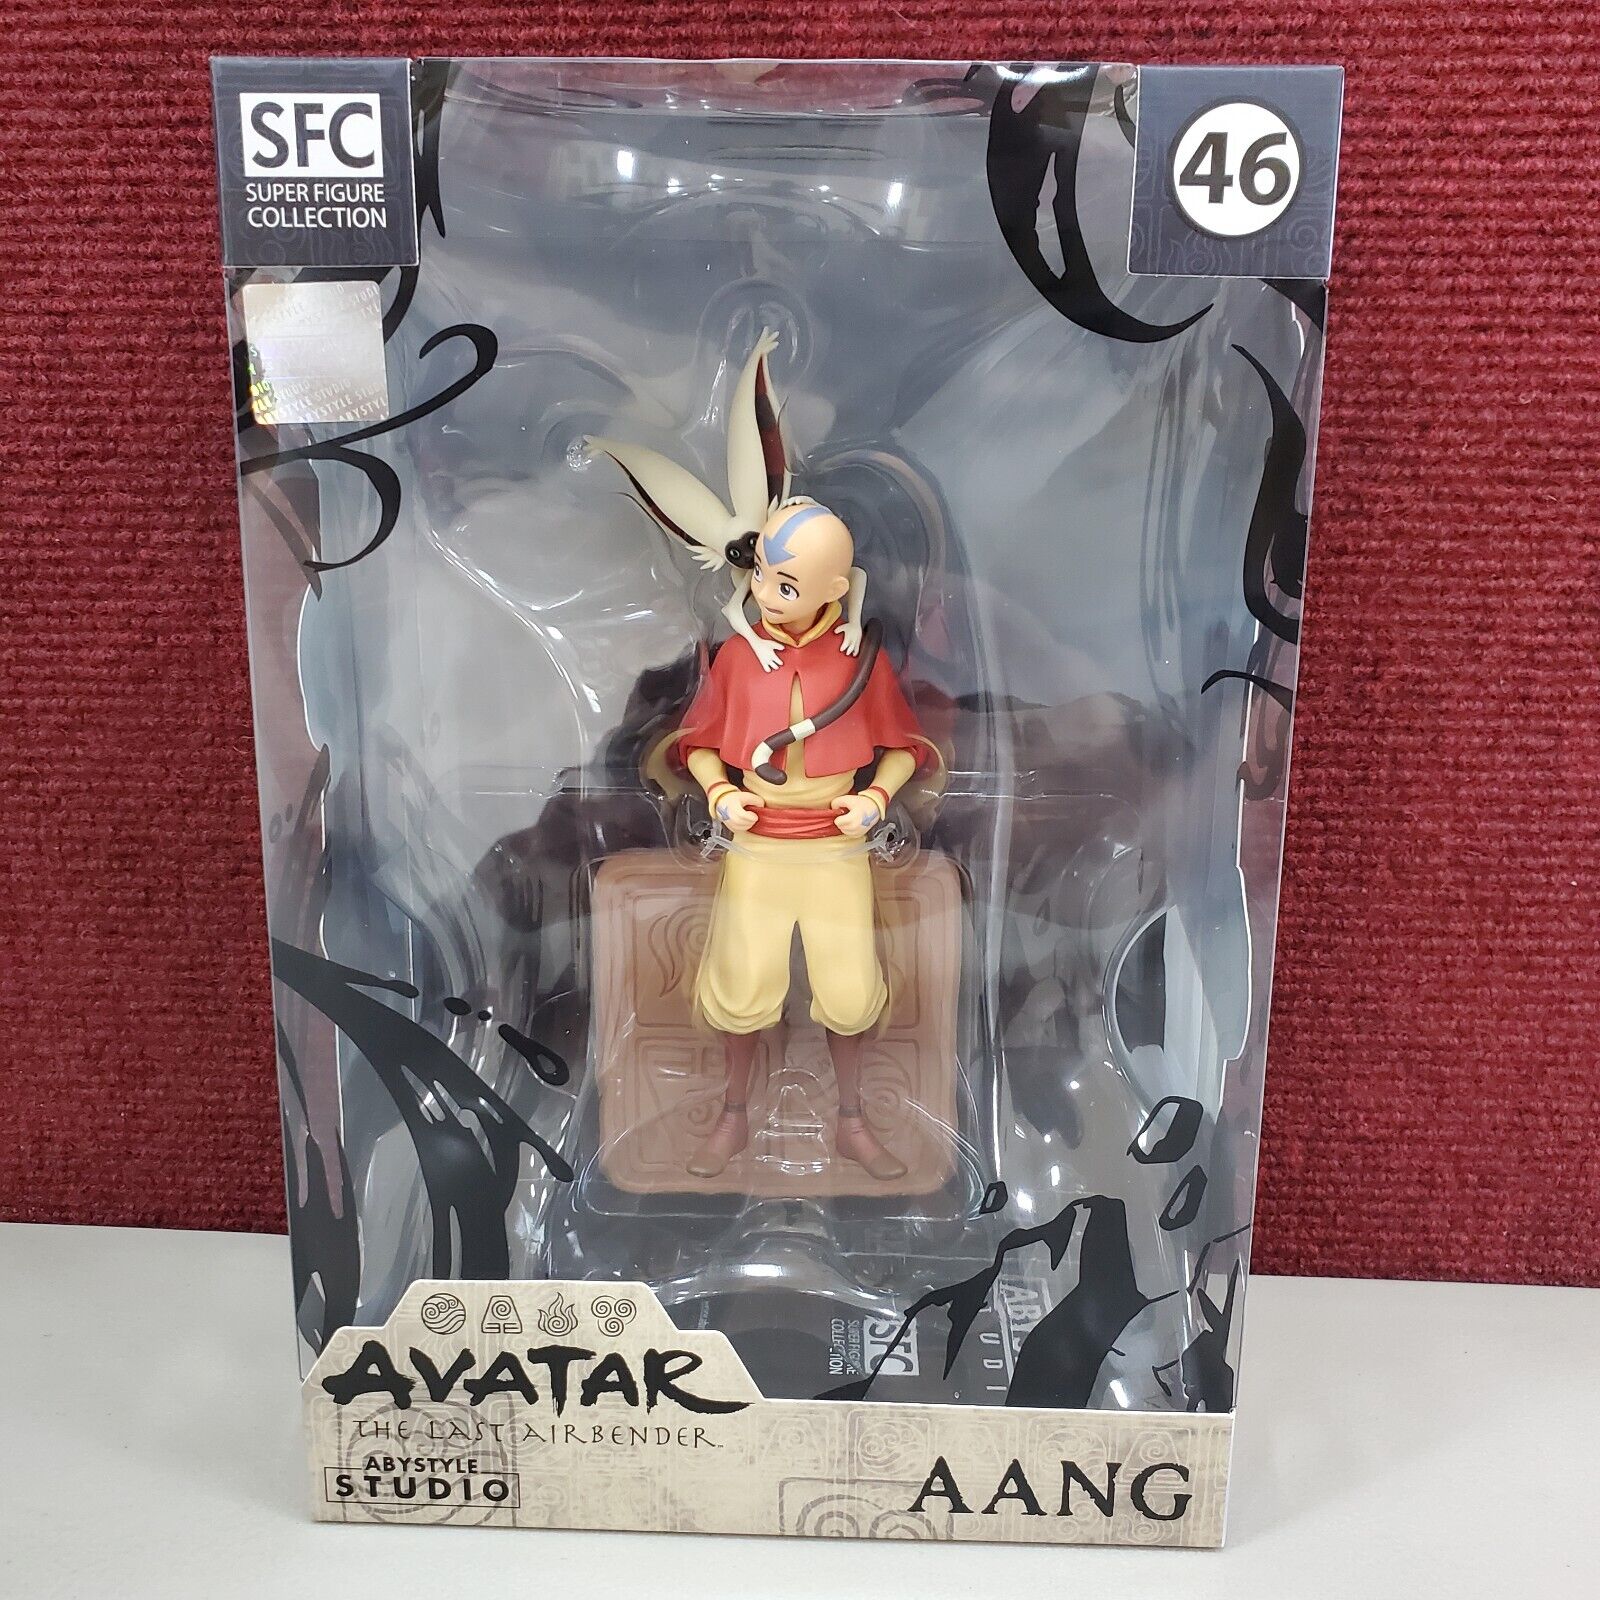 Abystyle Studio Avatar The Last Airbender Aang Collectible Figure